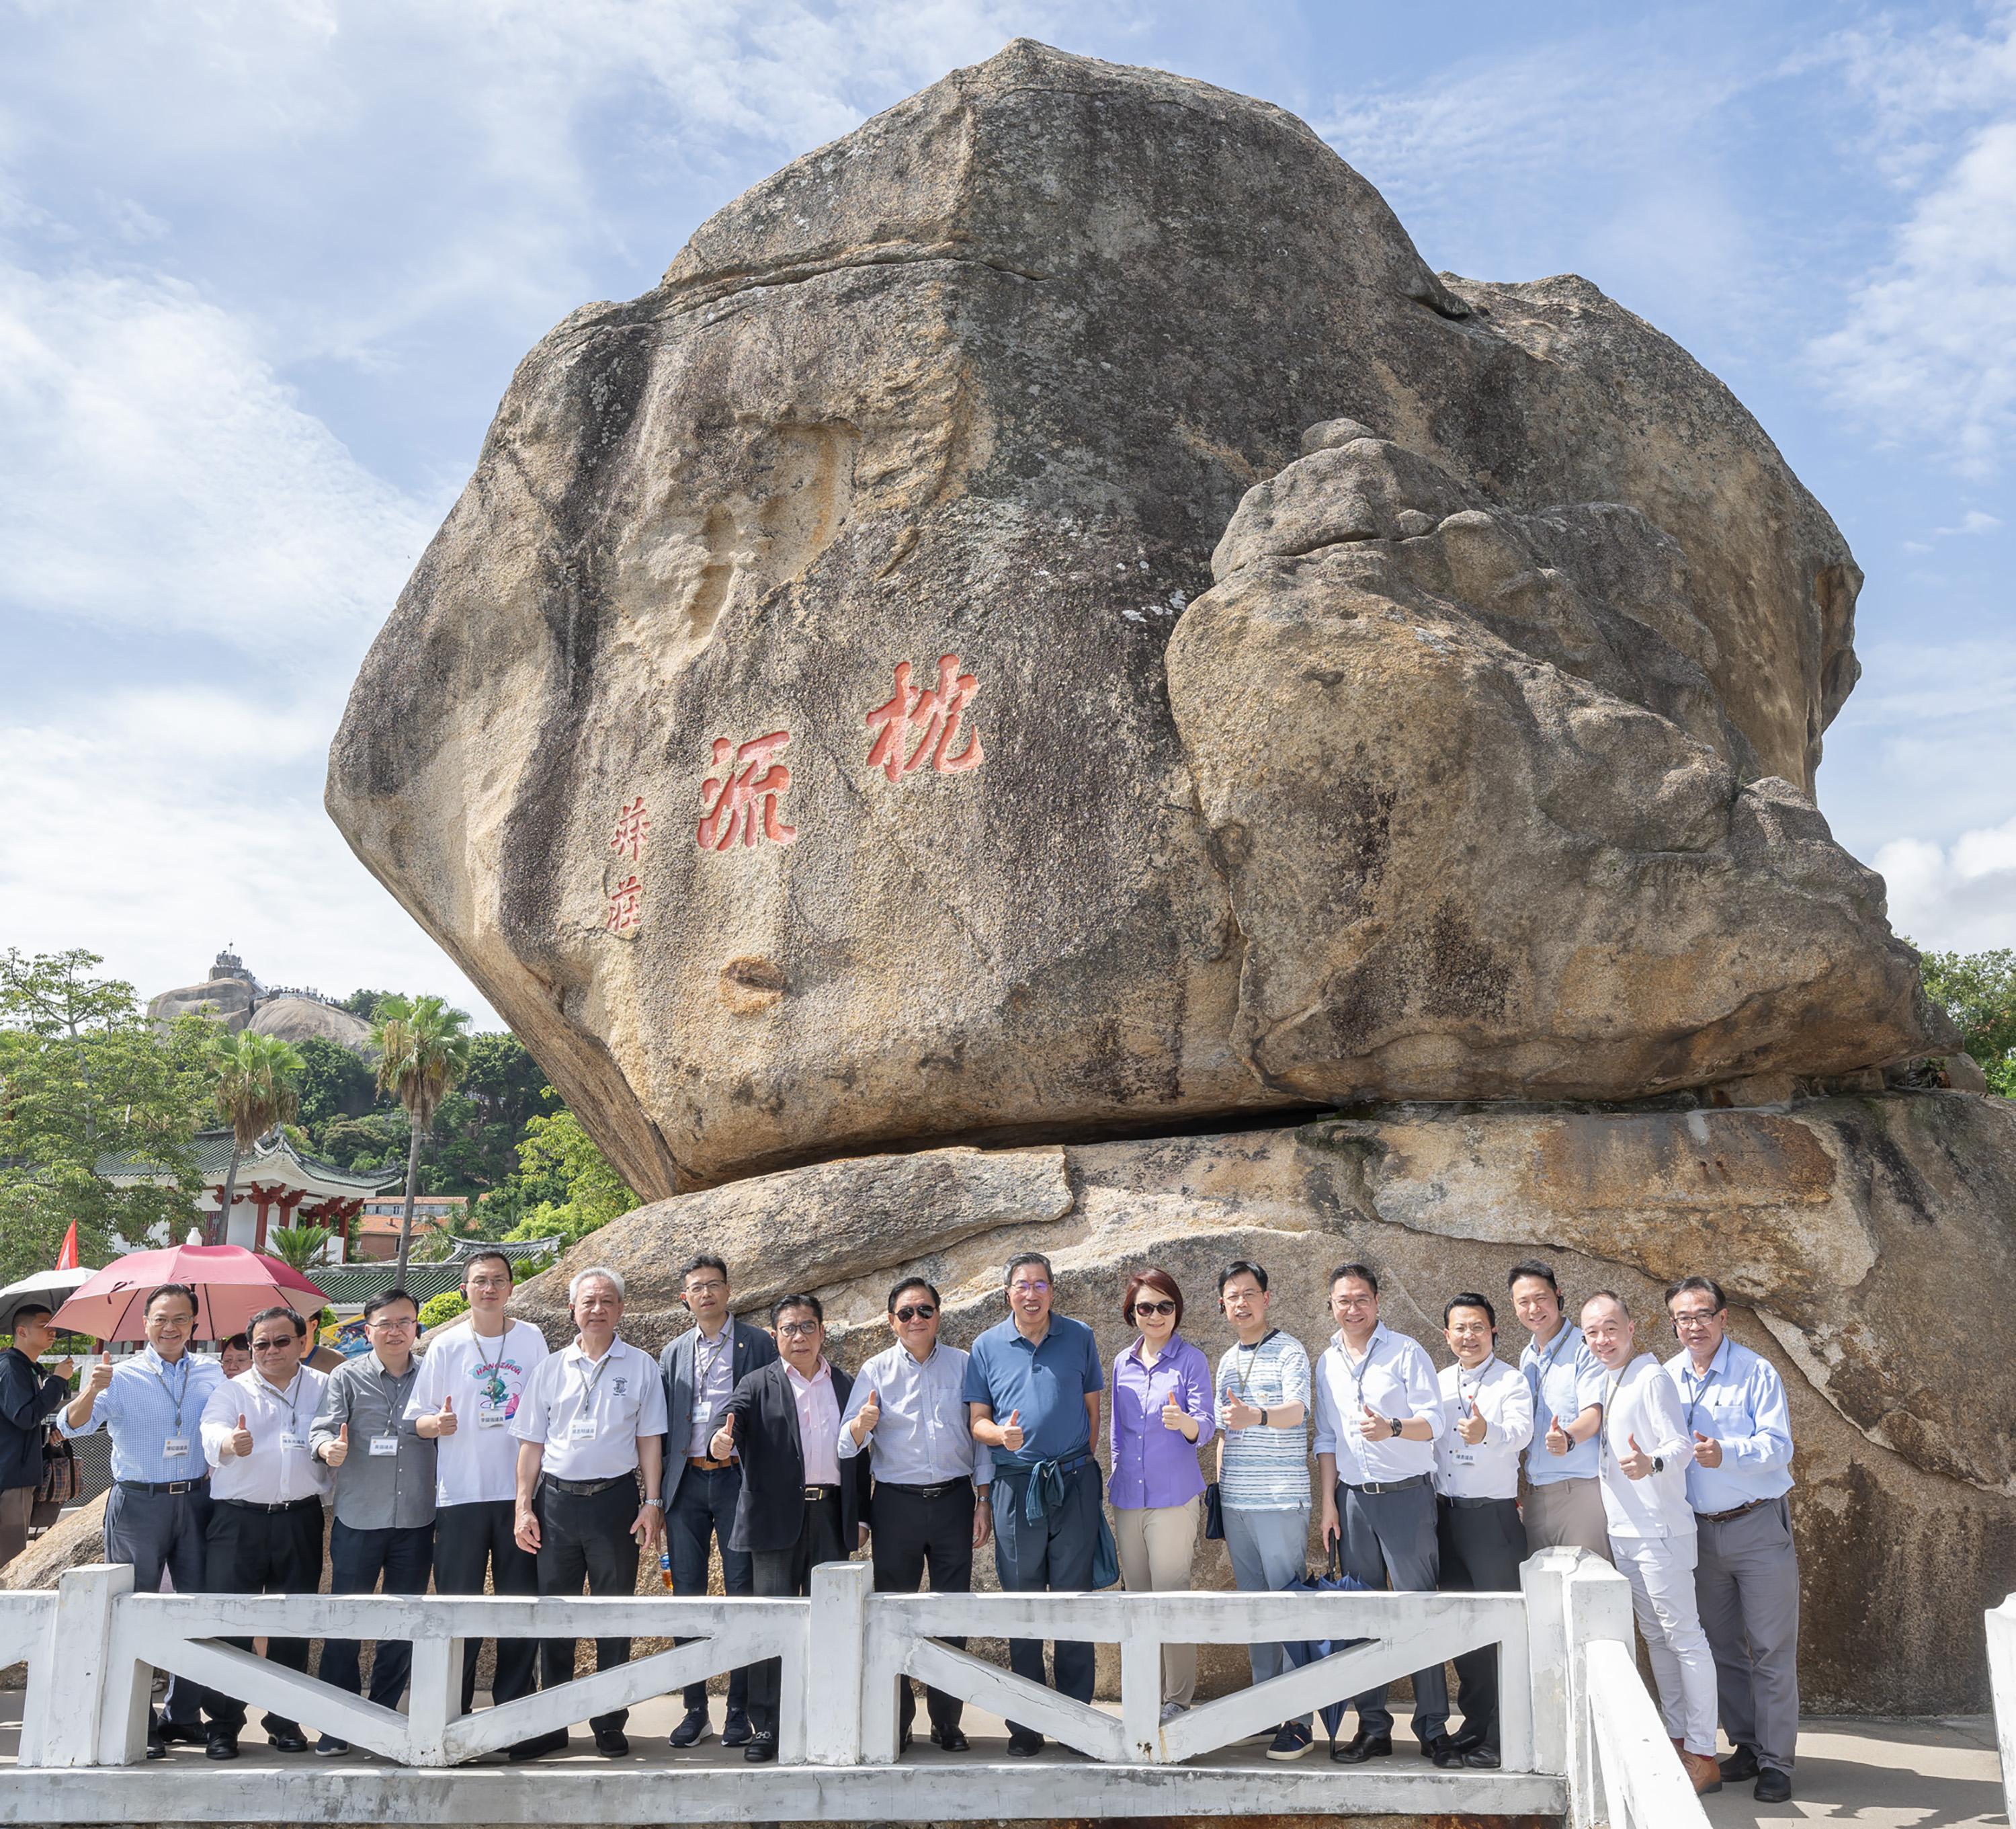 The delegation of the Legislative Council (LegCo), led by the LegCo President, Mr Andrew Leung, continued its study visit in Xiamen today (July 18). Photo shows the LegCo delegation visiting Gulangyu Island.